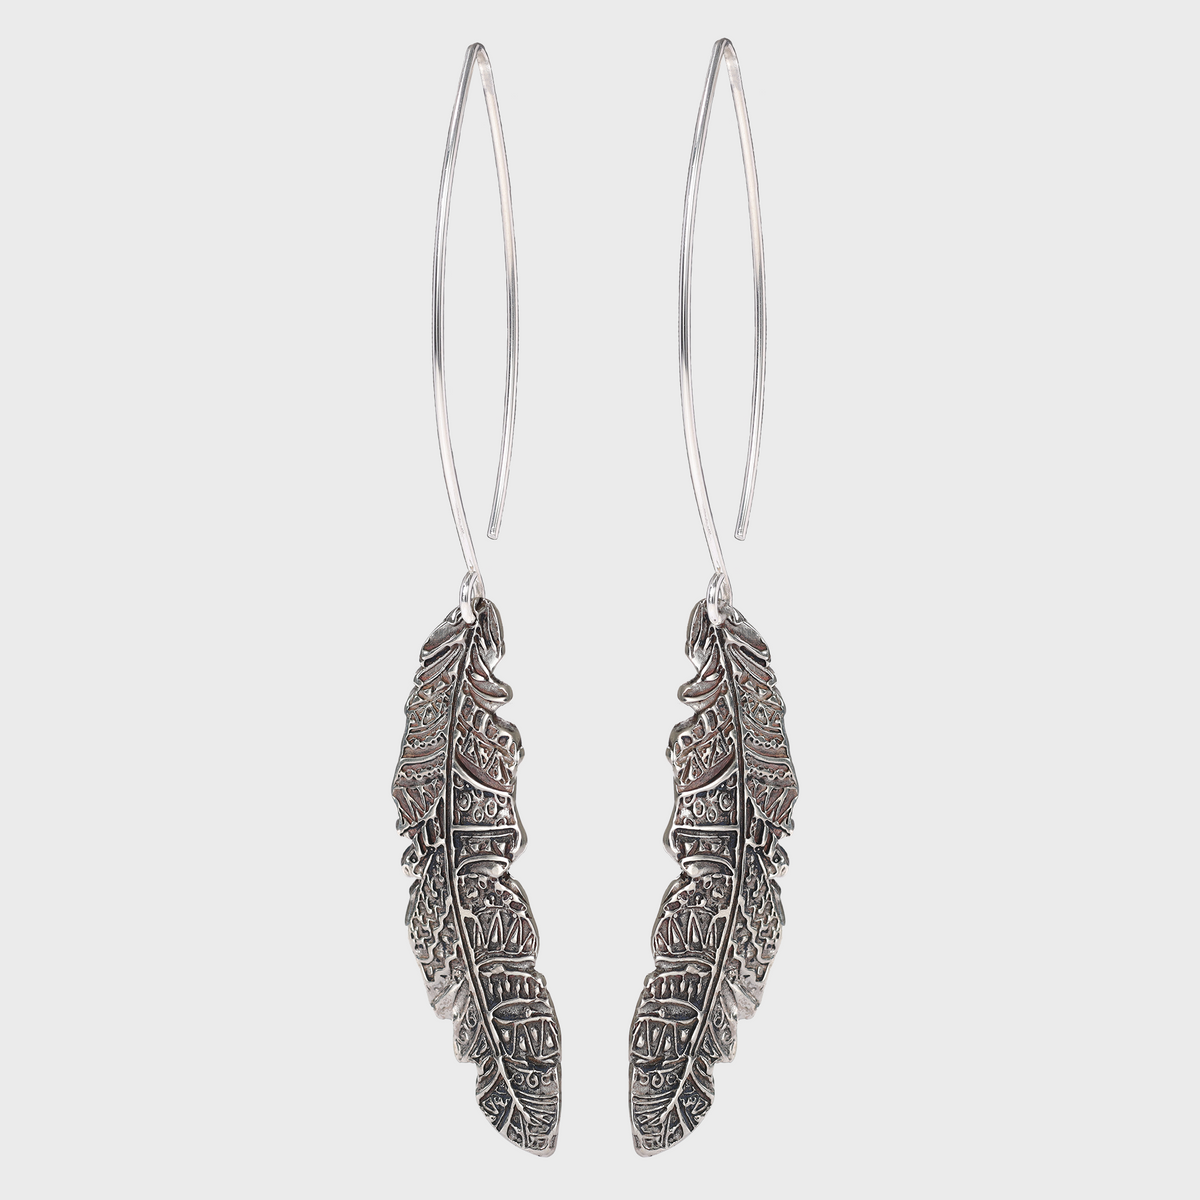 Feather Textured Large Sterling Silver Earrings on Long Ear Wires